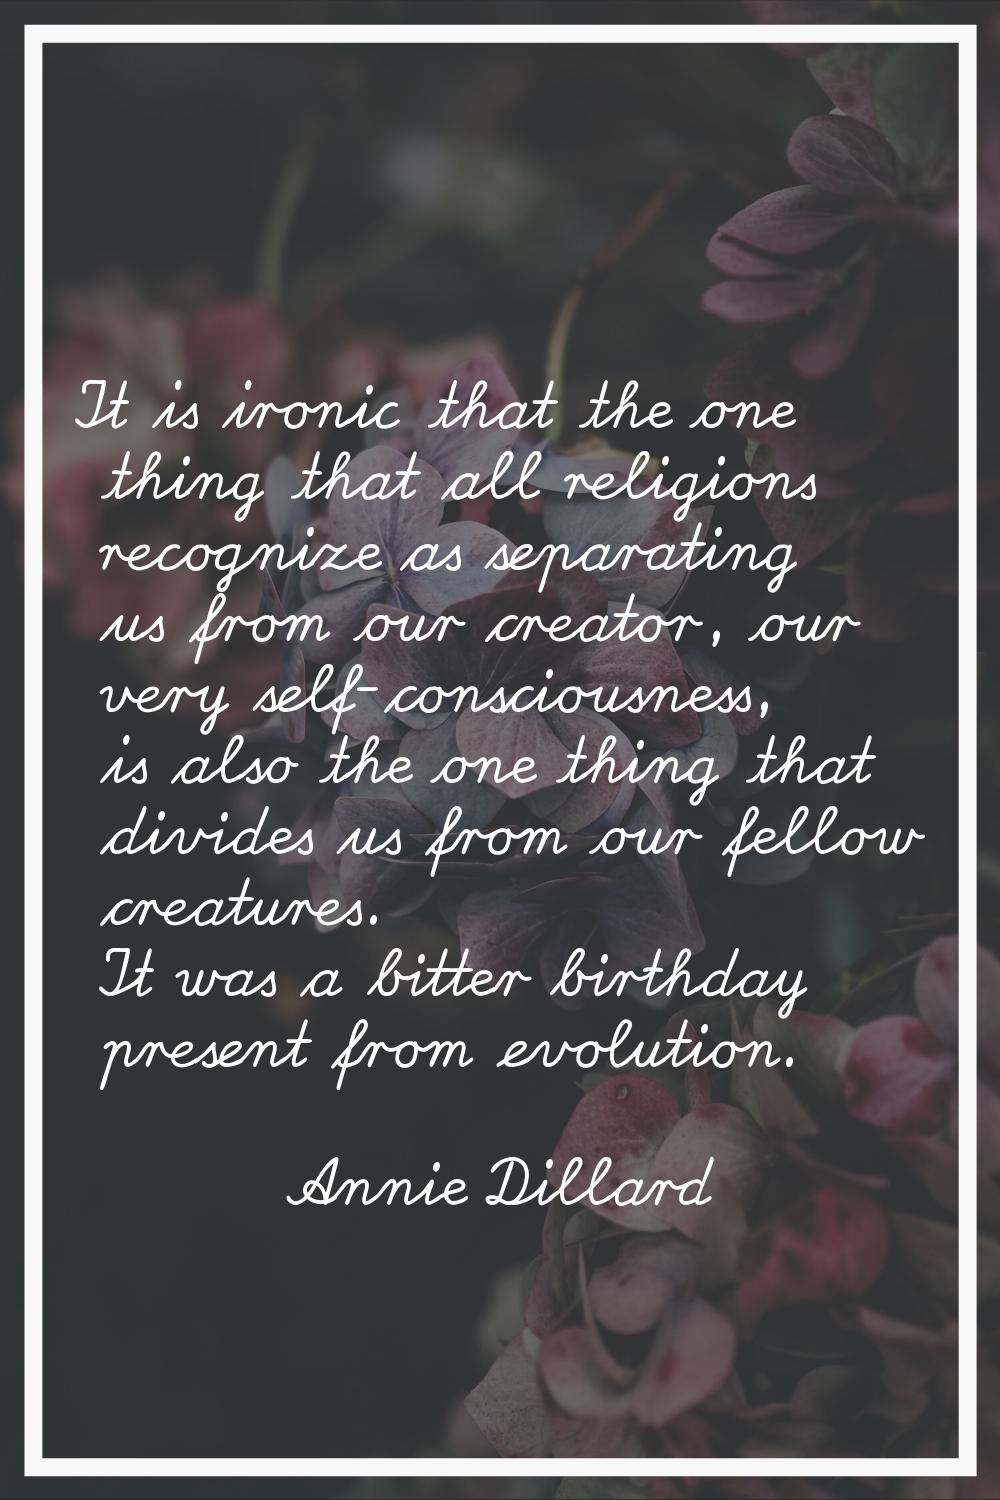 It is ironic that the one thing that all religions recognize as separating us from our creator, our